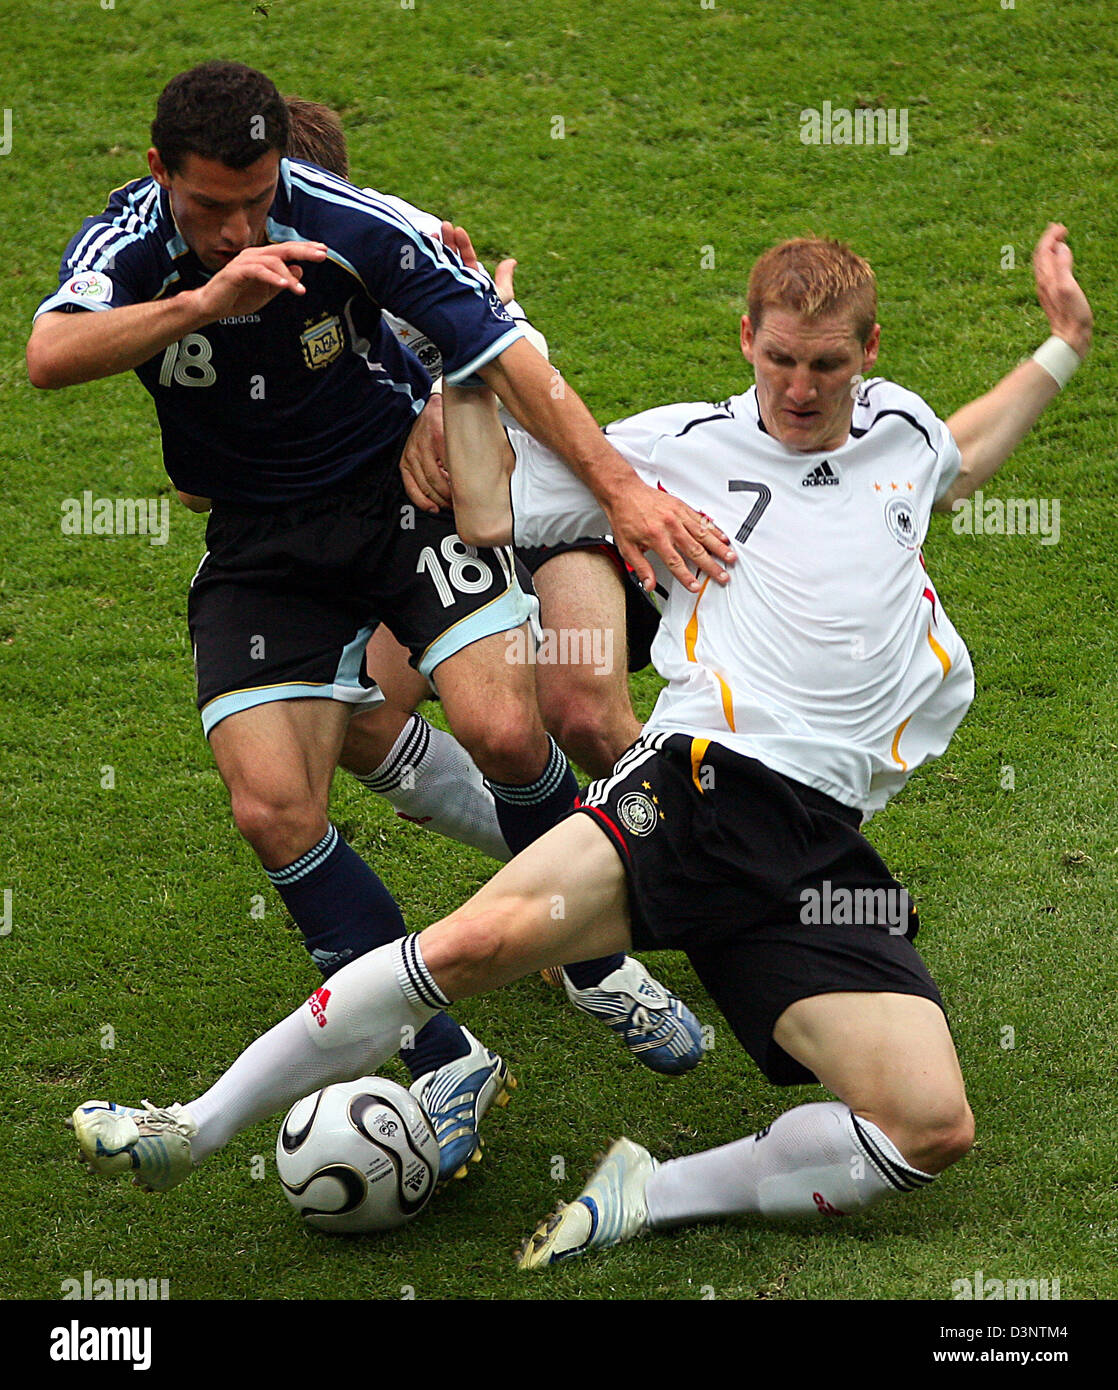 German Bastian Schweinsteiger (R) struggles for the ball with Argentinian Maxi Rodriguez (L) during the quarter final of the 2006 FIFA World Cup between Germany and Argentina at the Olympic Stadium in Berlin, Germany, Friday, 30 June 2006. Photo: PETER KNEFFEL +++ Mobile Services OUT +++ Please refer to FIFA's Terms and Conditions. Stock Photo